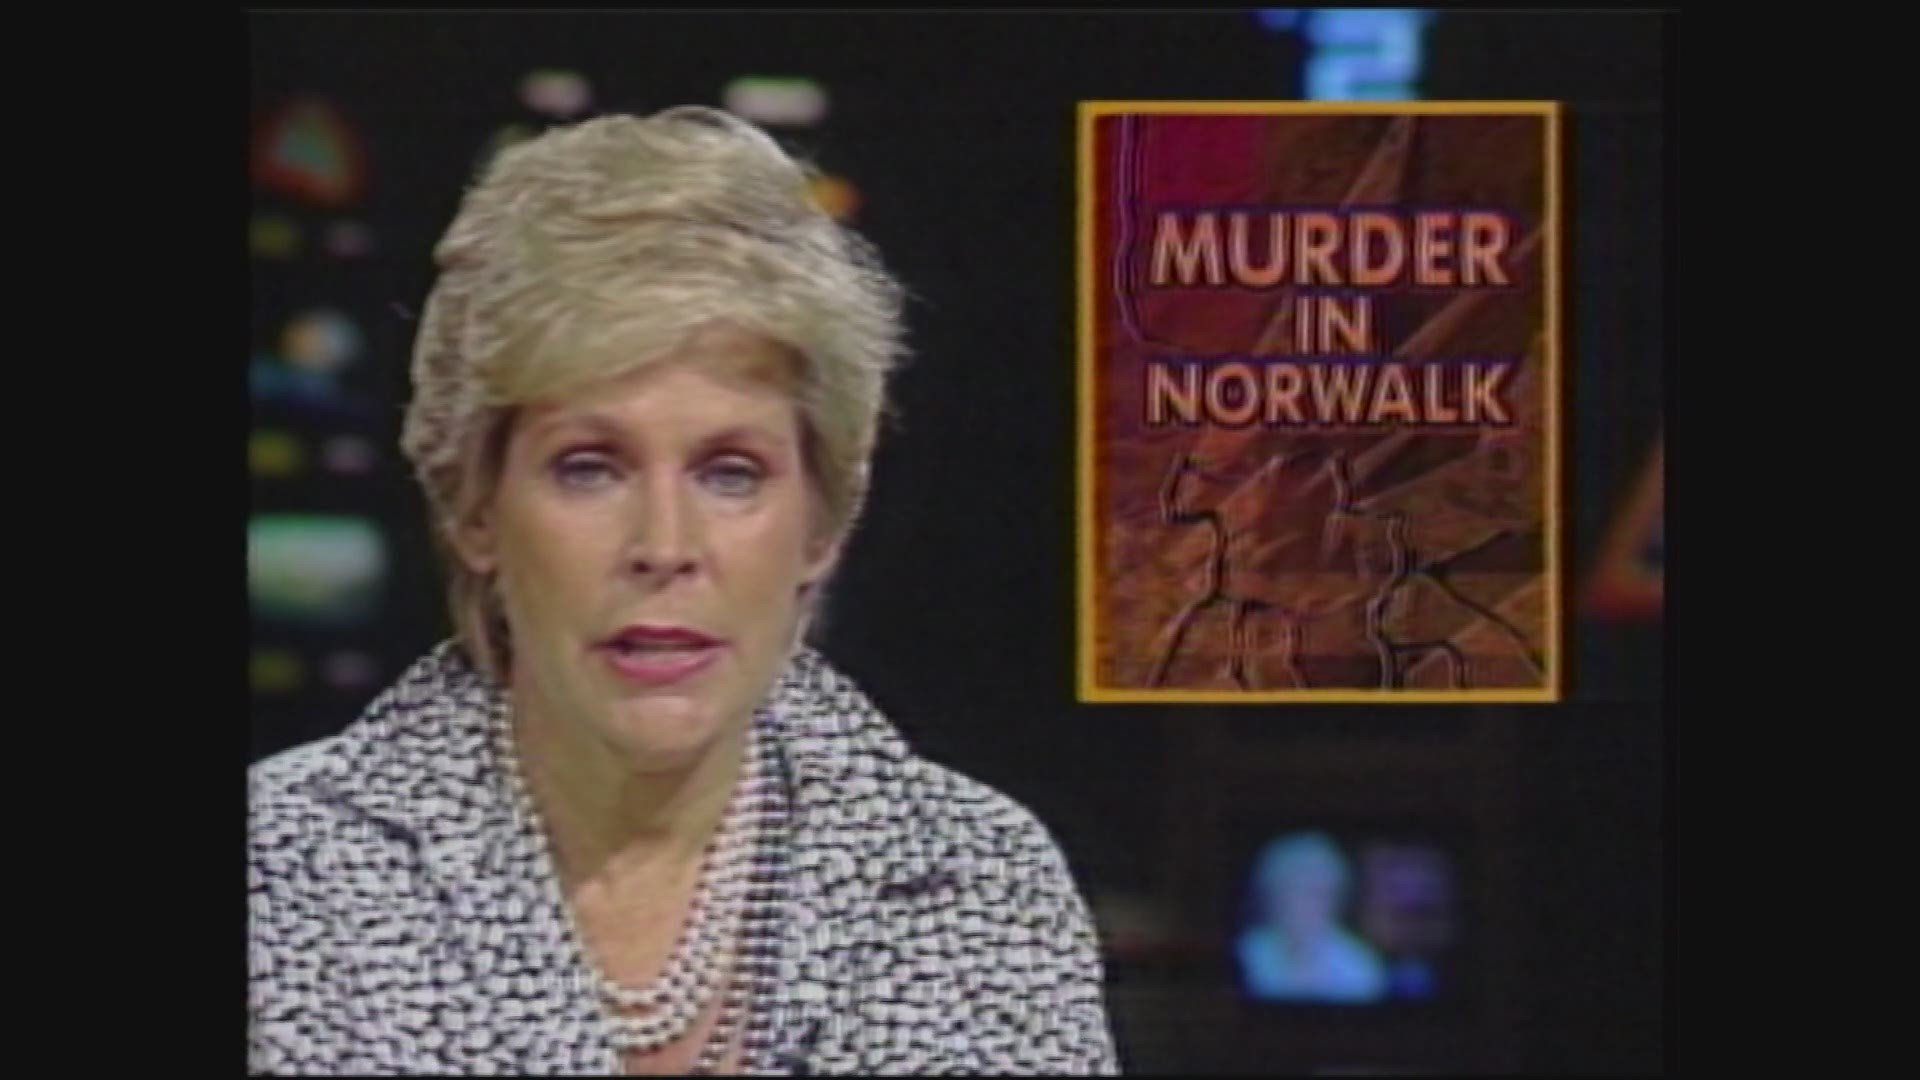 WNBC-TV reports on the Sept. 23, 1986, murder of 11-year-old Kathleen Flynn in Norwalk, Connecticut